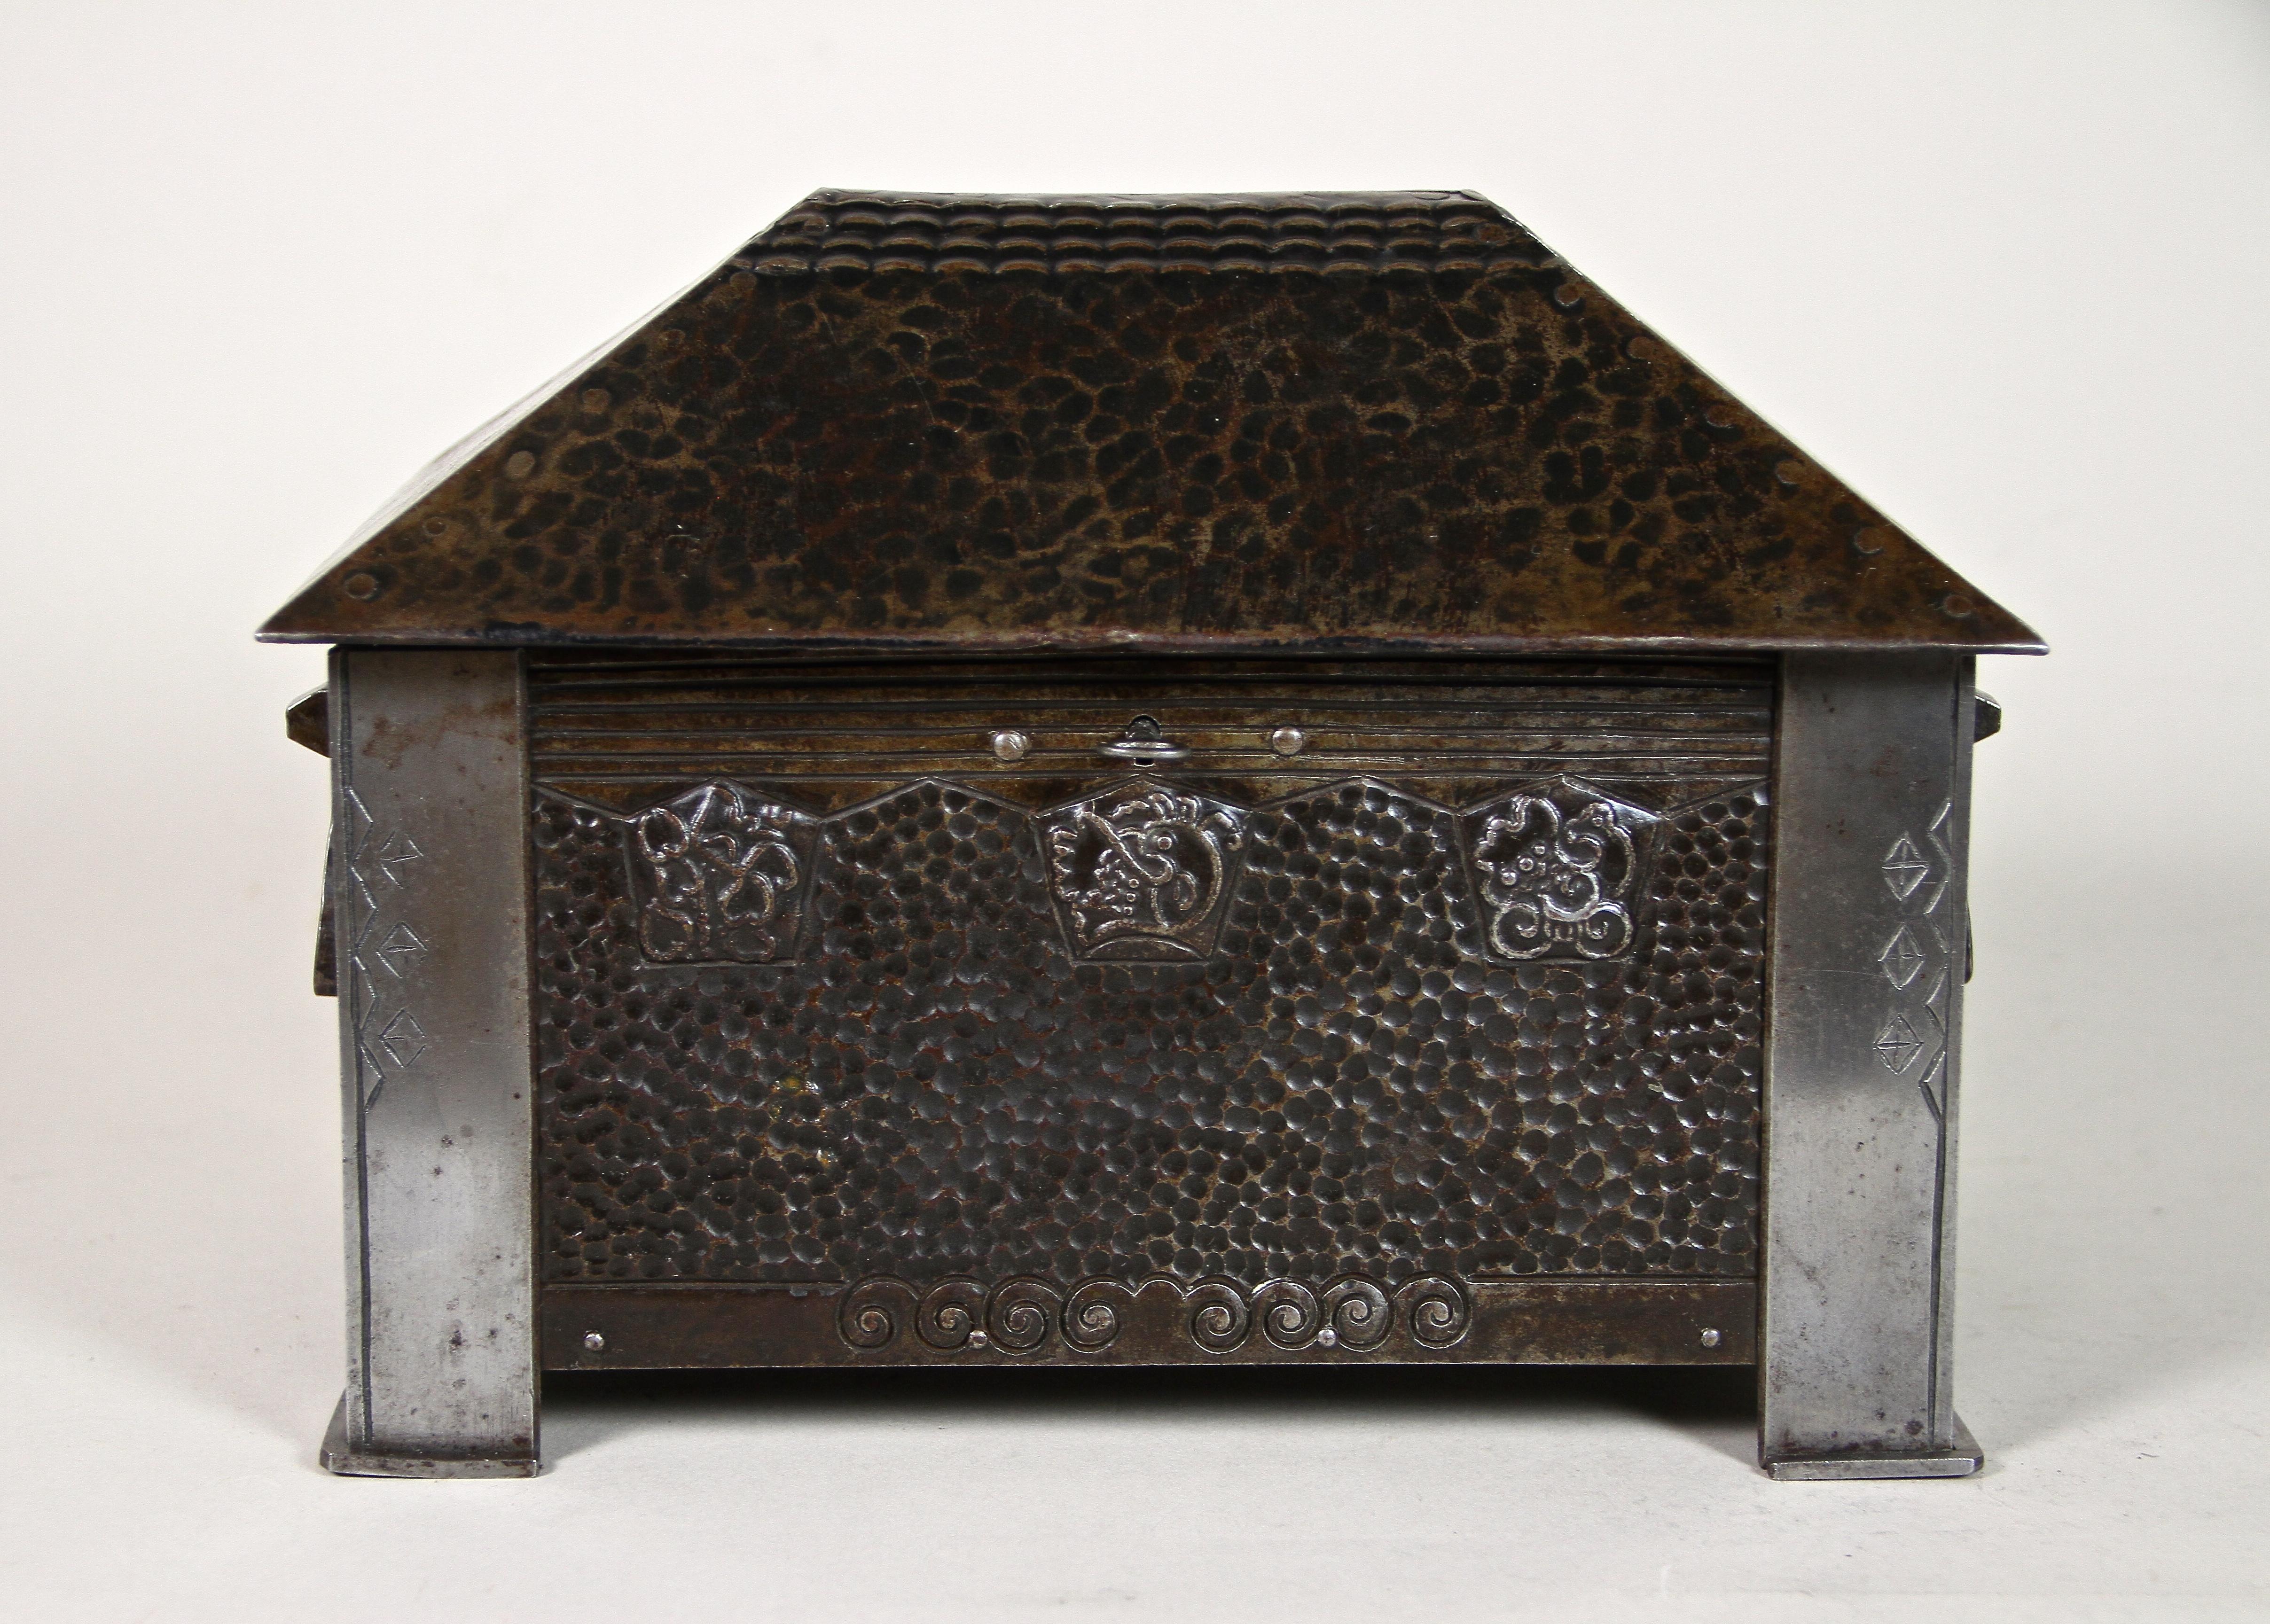 One of a kind Art Nouveau Metal Chest or Box elaborately handmade by the artist in Hungary around 1900. Designed in the style of a treasure chest, this uncommon metal box shows a beautiful hammer finished surface and impresses with artfully engraved